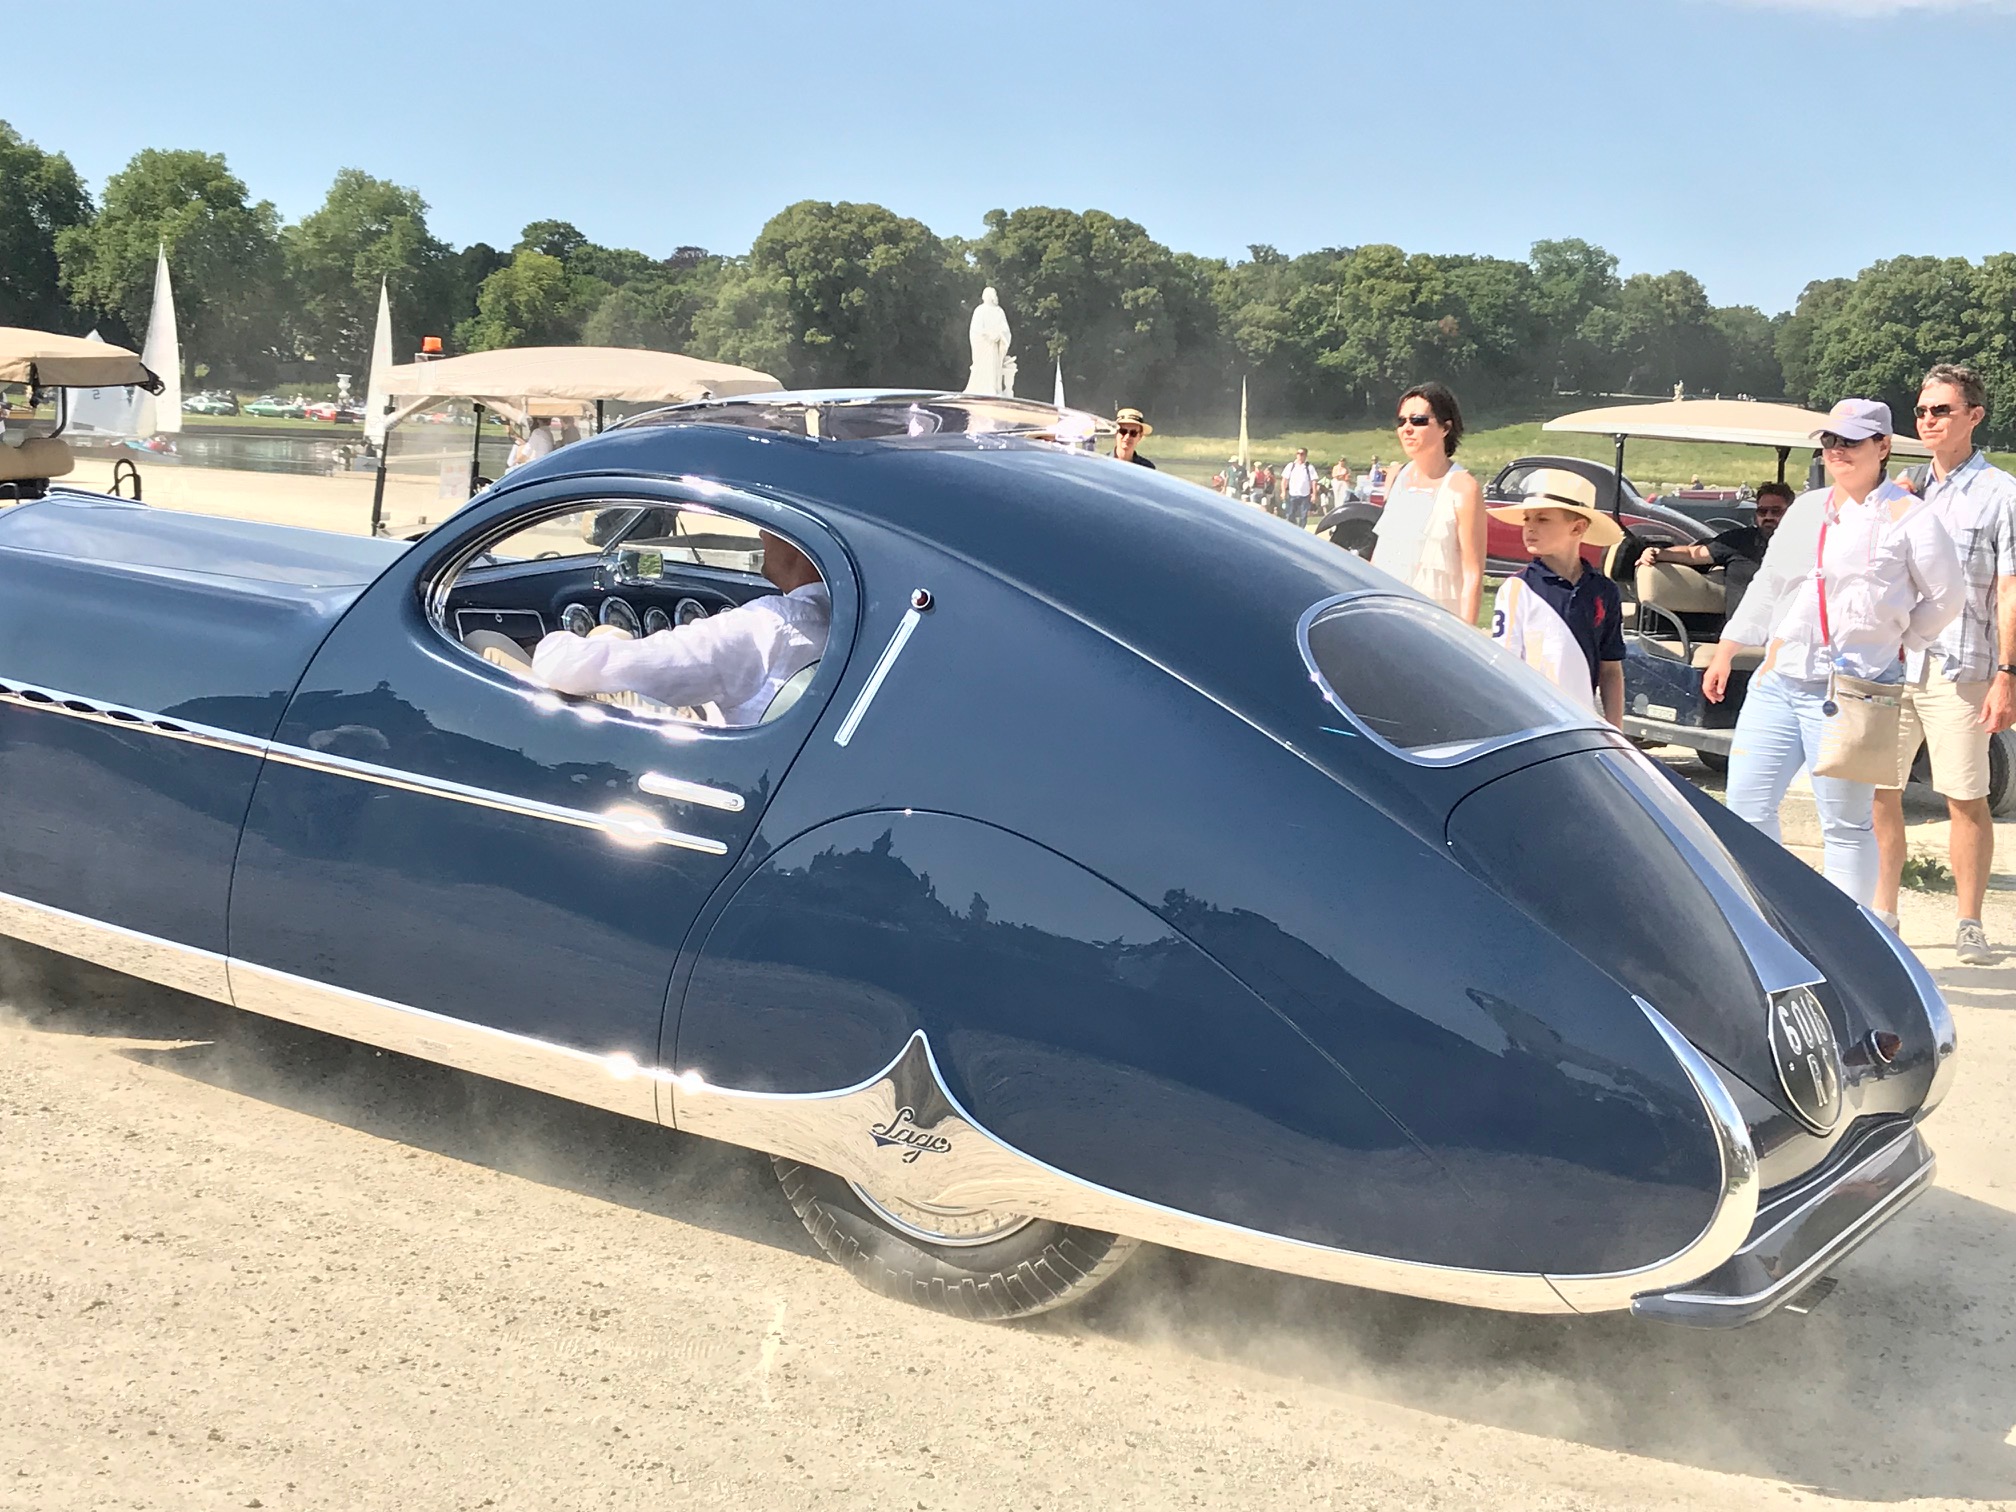 Classic & Sports Car – Talbot-Lago is cream of the crop in Chantilly